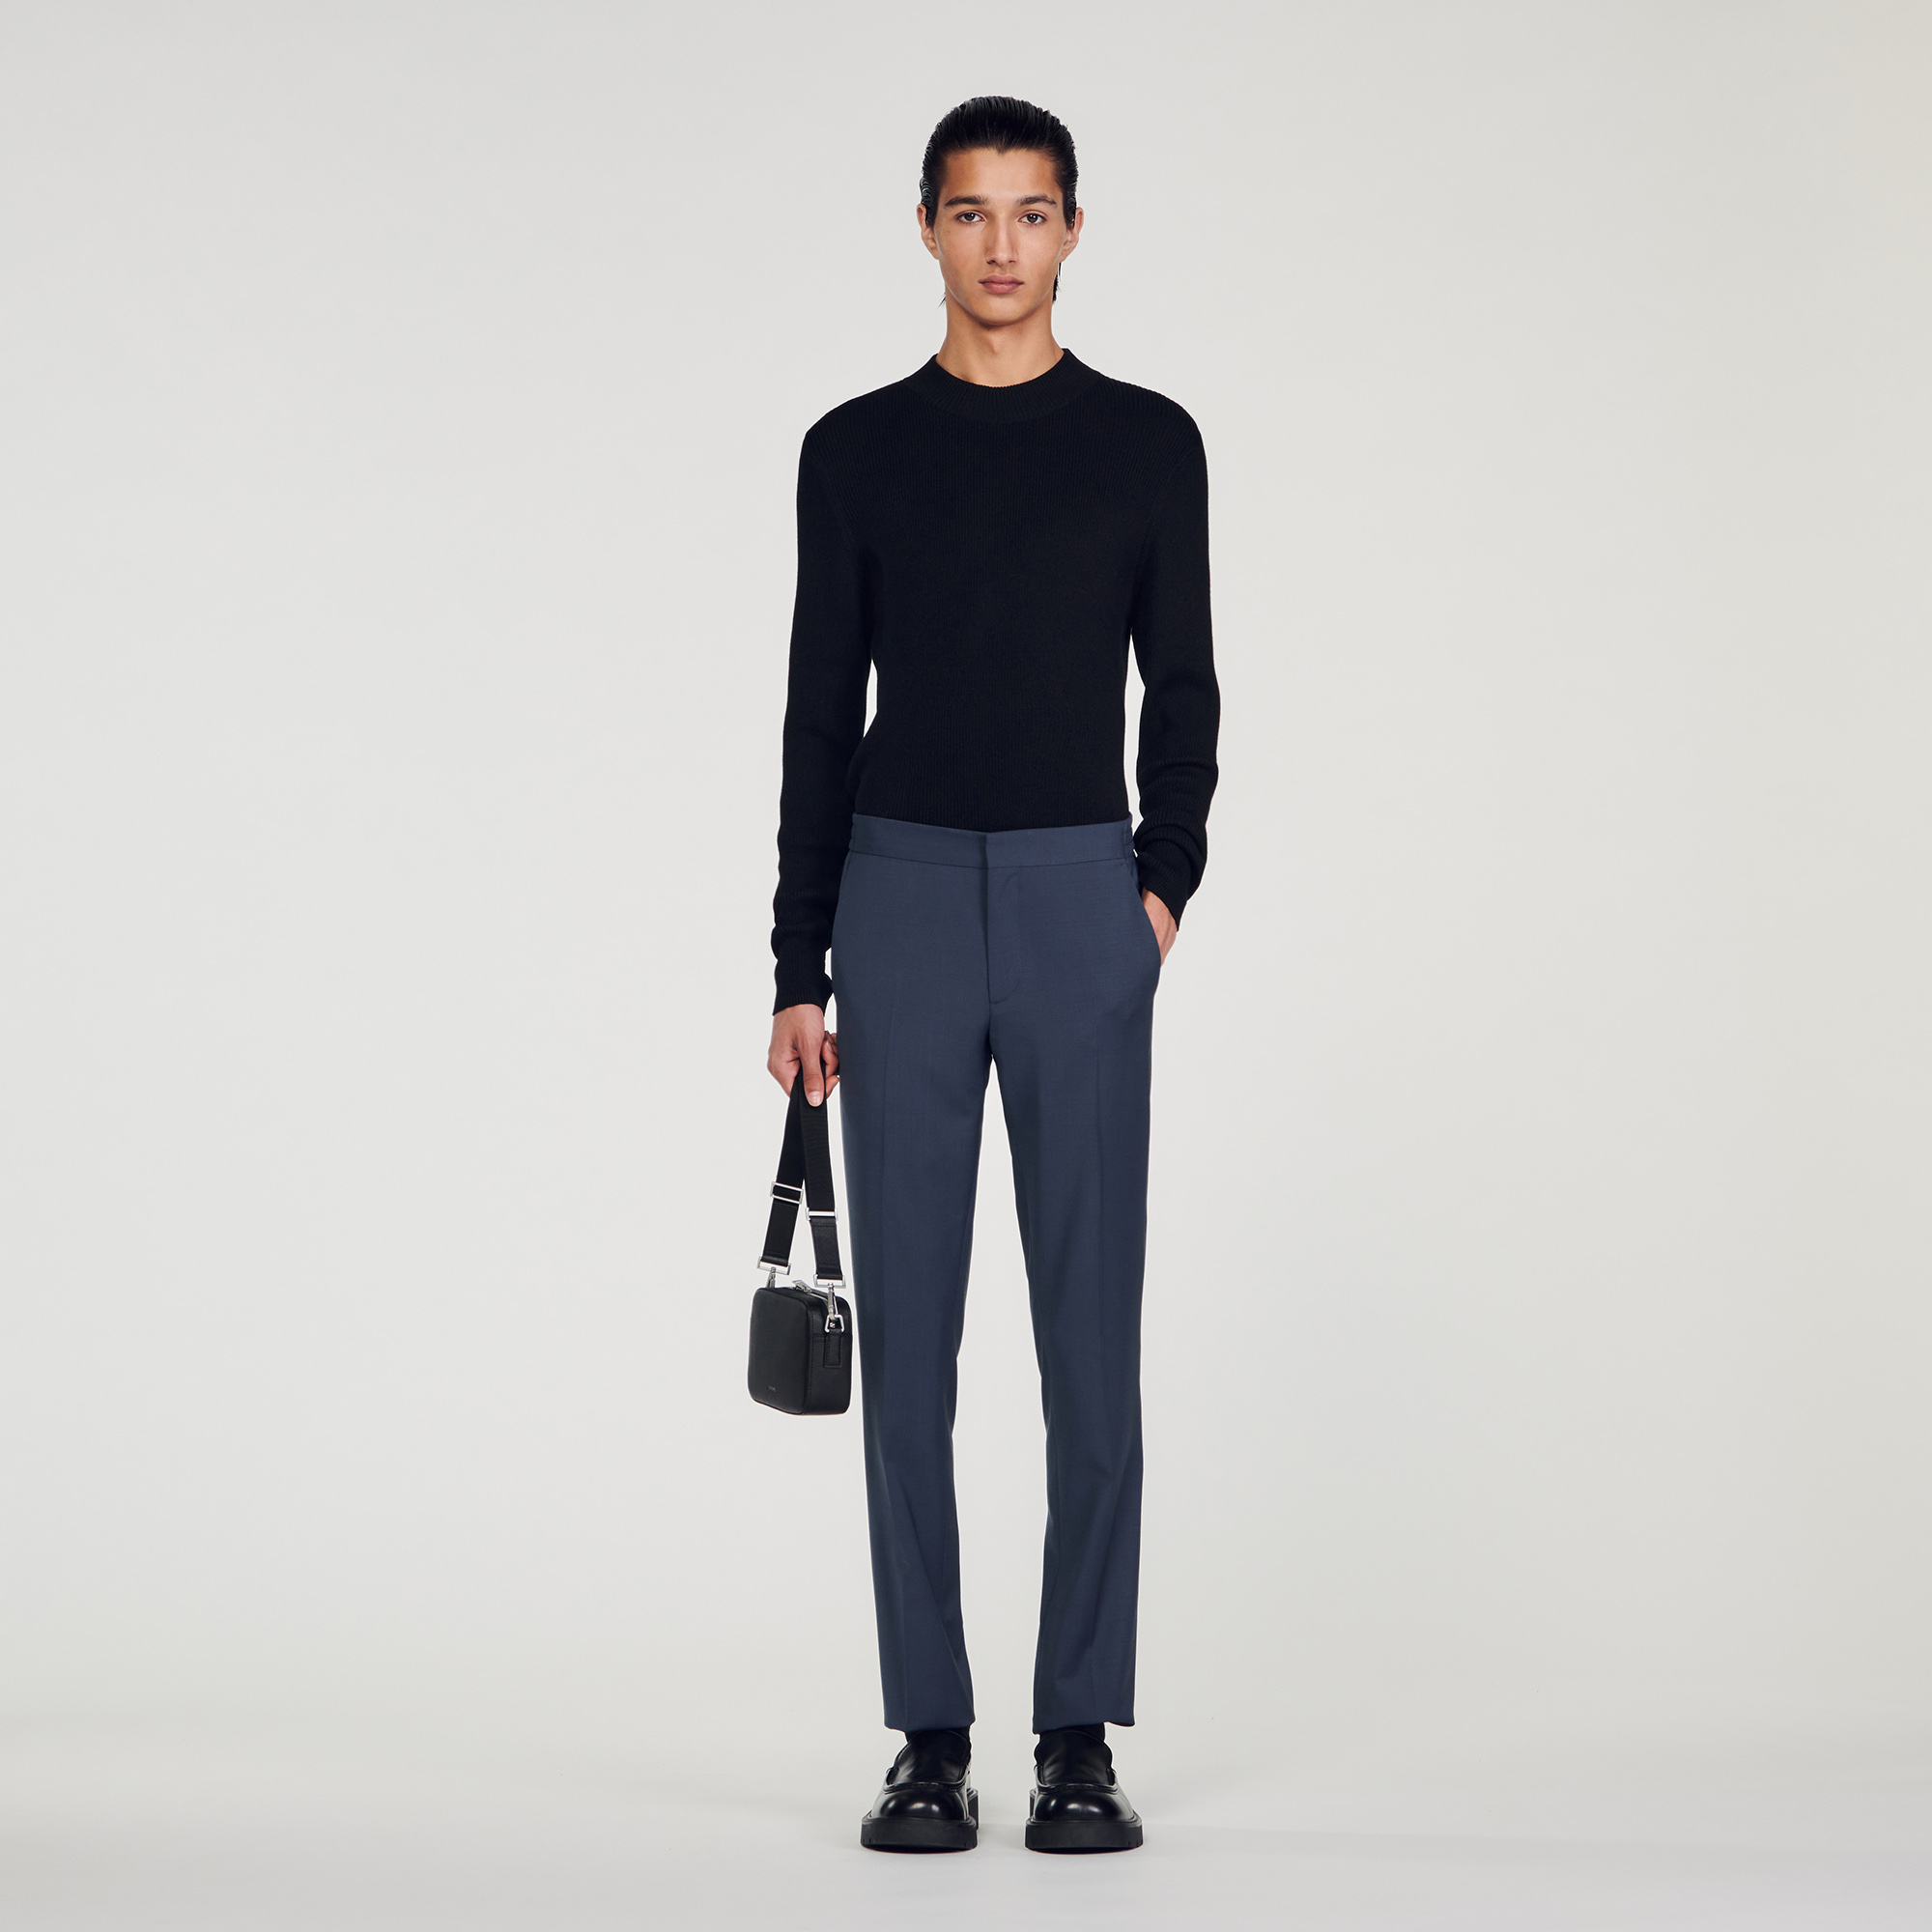 Sandro wool Straight-leg virgin wool pants with elastic at the waist, sides and back